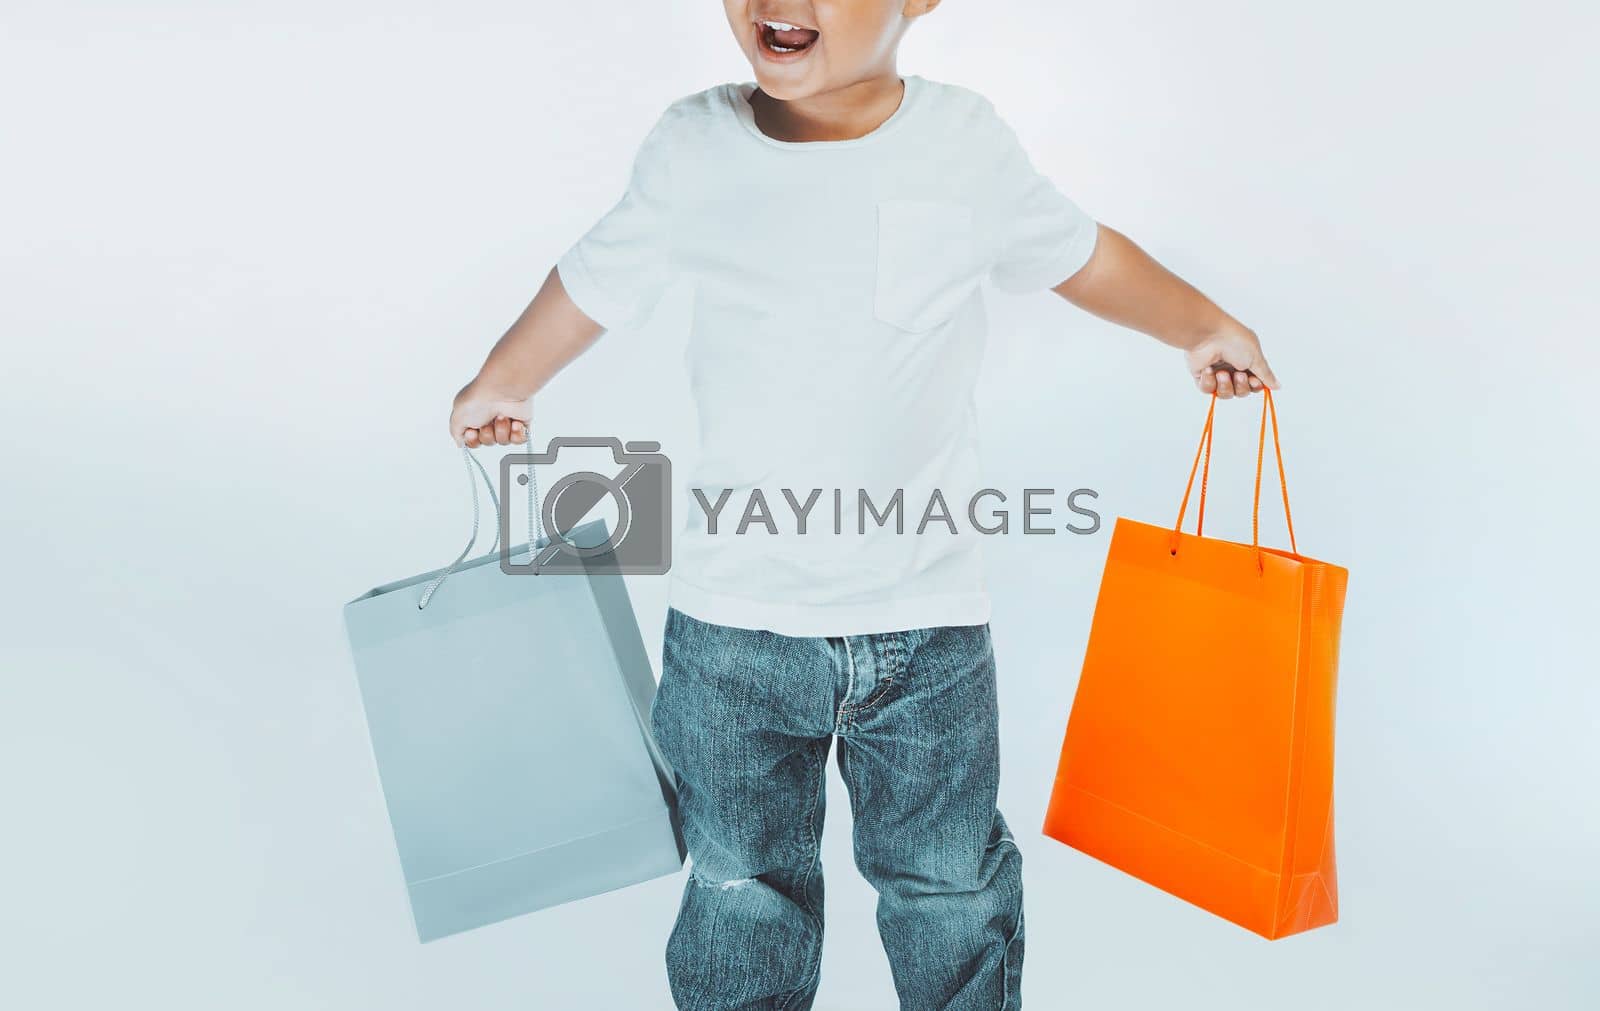 Royalty free image of Little Boy with Shopping Bag by Anna_Omelchenko